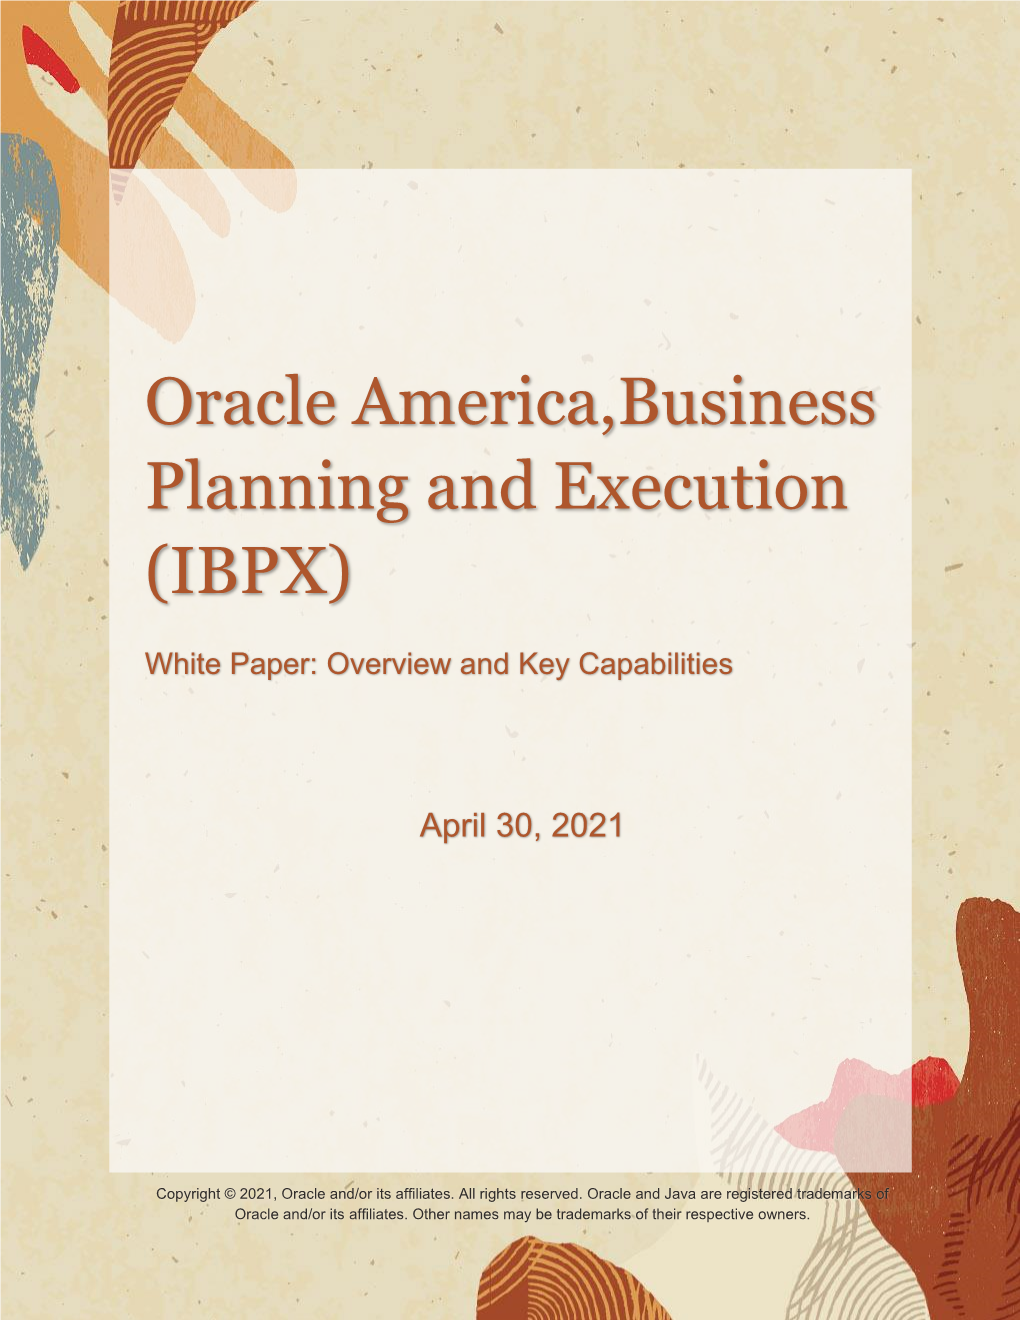 Oracle America,Business Planning and Execution (IBPX)